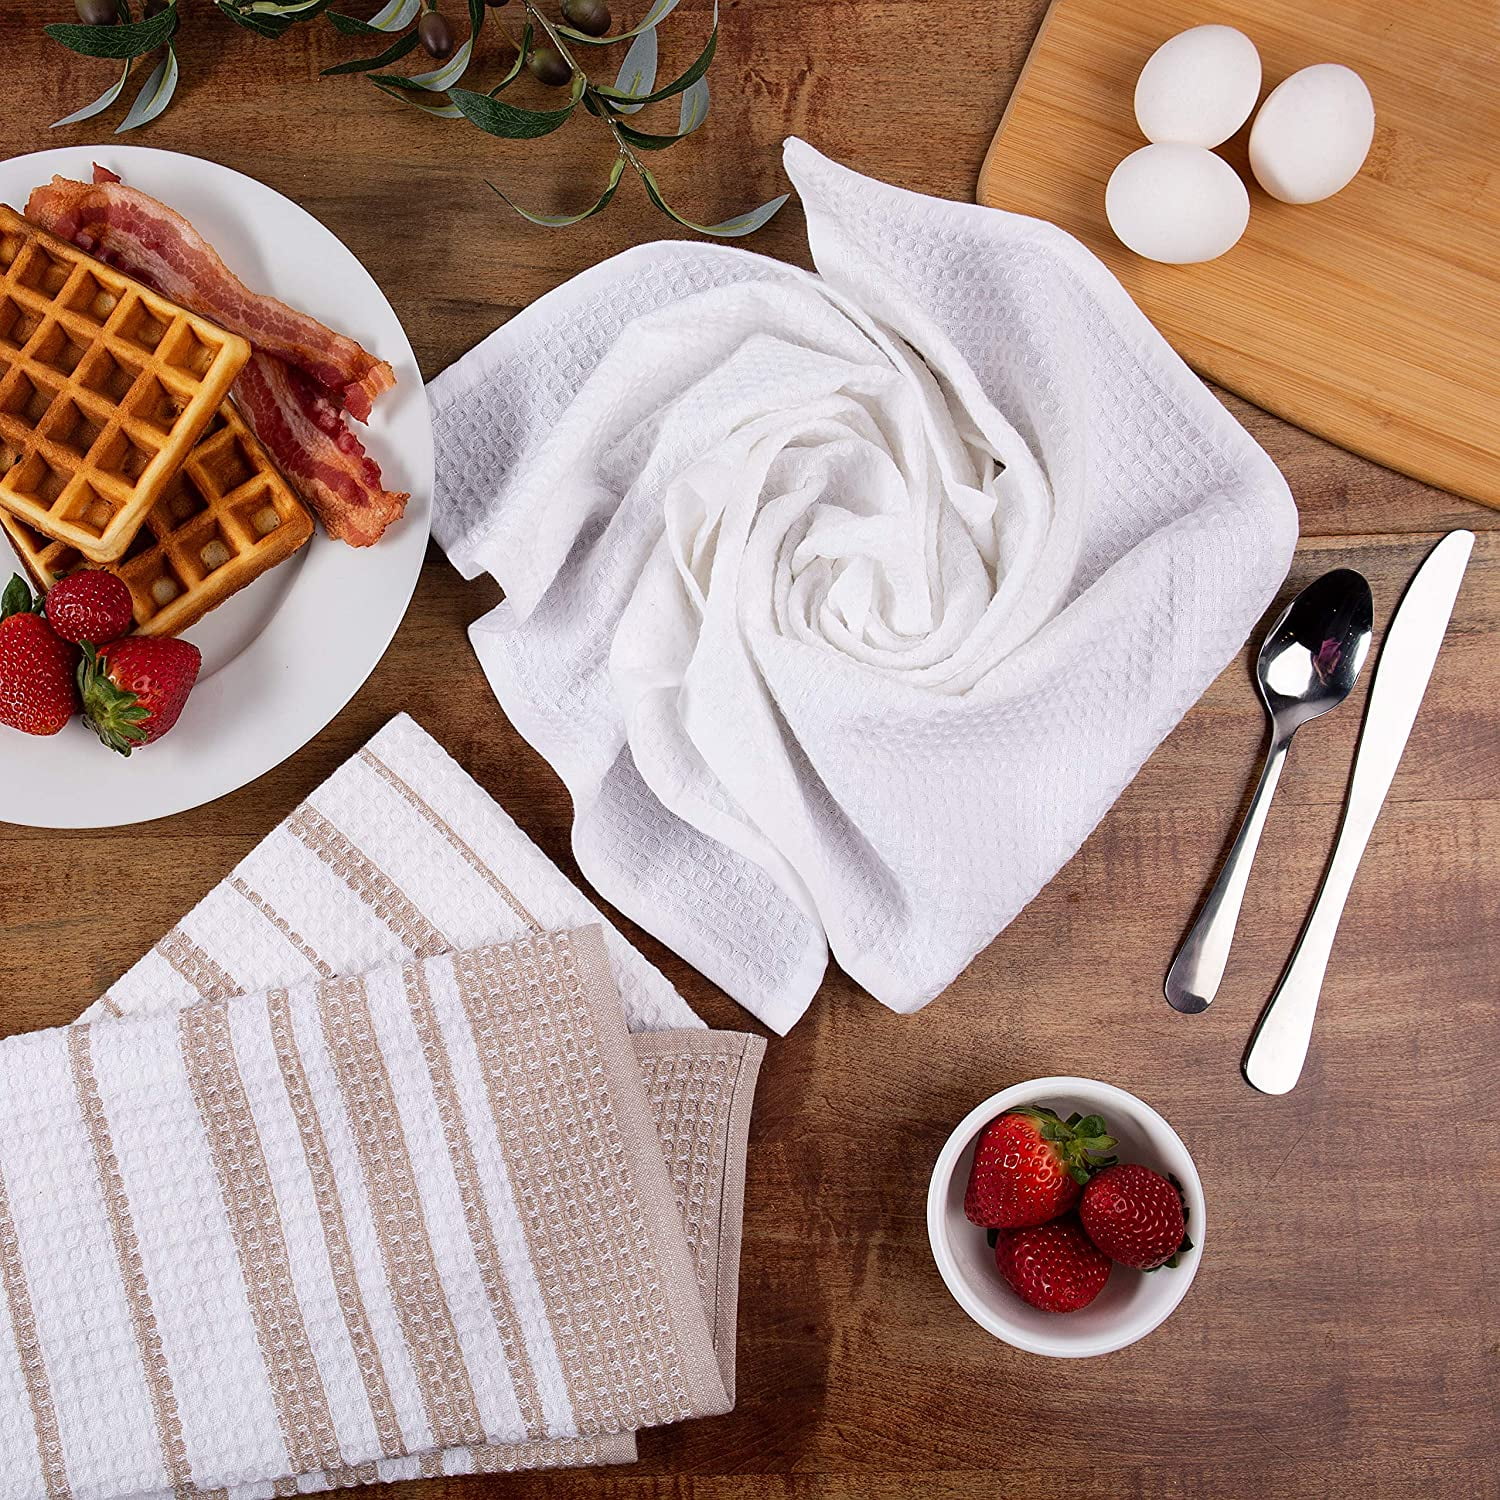  Waffle Kitchen Towels Set of 3, White and Blue Waffle Weave  Dish Towels for Kitchen, Absorbent Waffle Hand Towels, Oeko-Tex Cotton Tea  Towels, 28 in x 16 in : Home & Kitchen